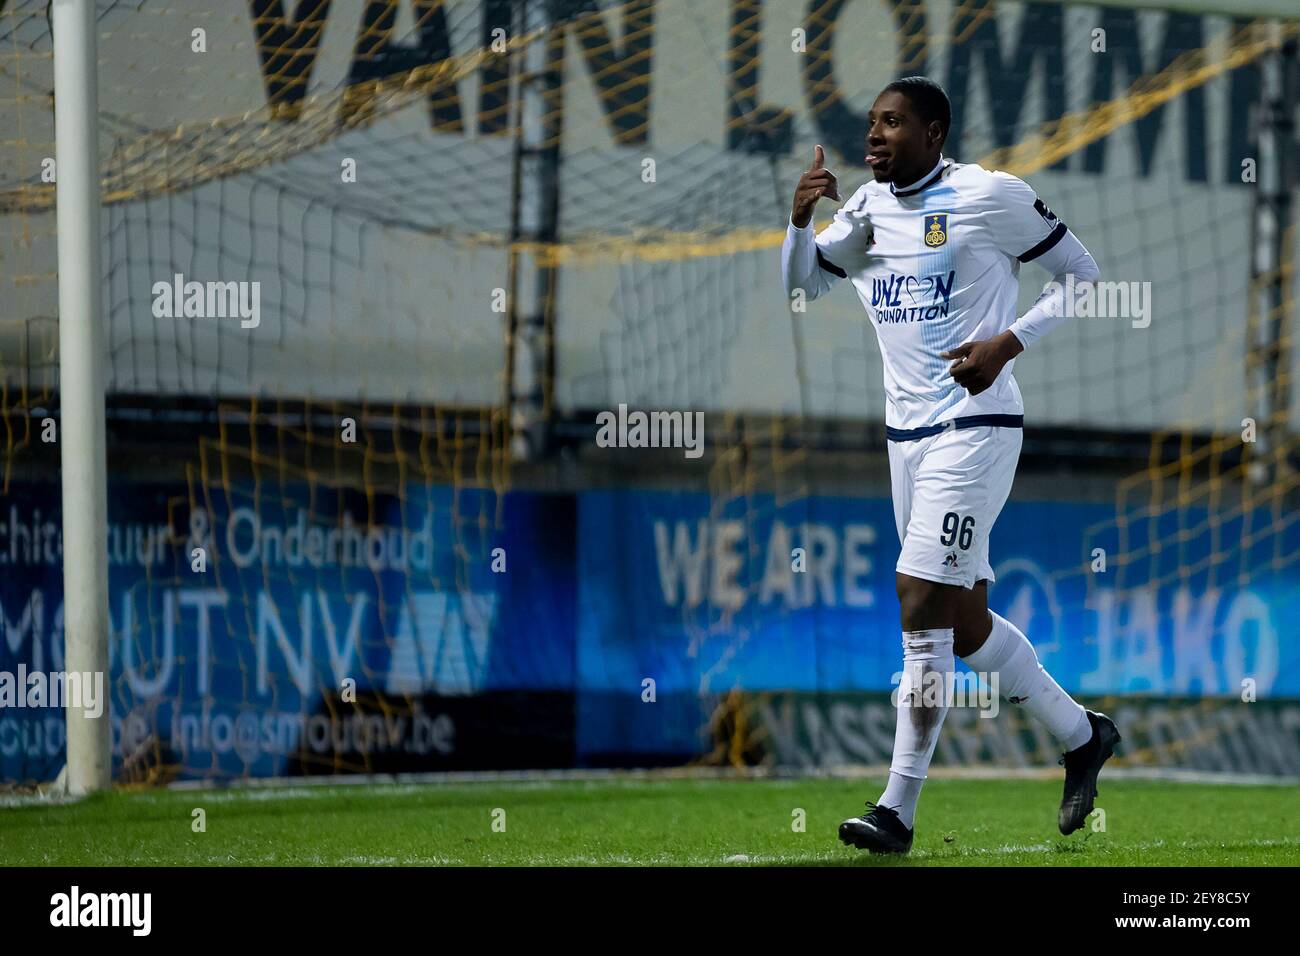 Union's Brighton Labeau celebrates after scoring during a soccer match between Lierse Kempenzonen and Union Saint-Gilloise, Friday 05 March 2021 in Li Stock Photo